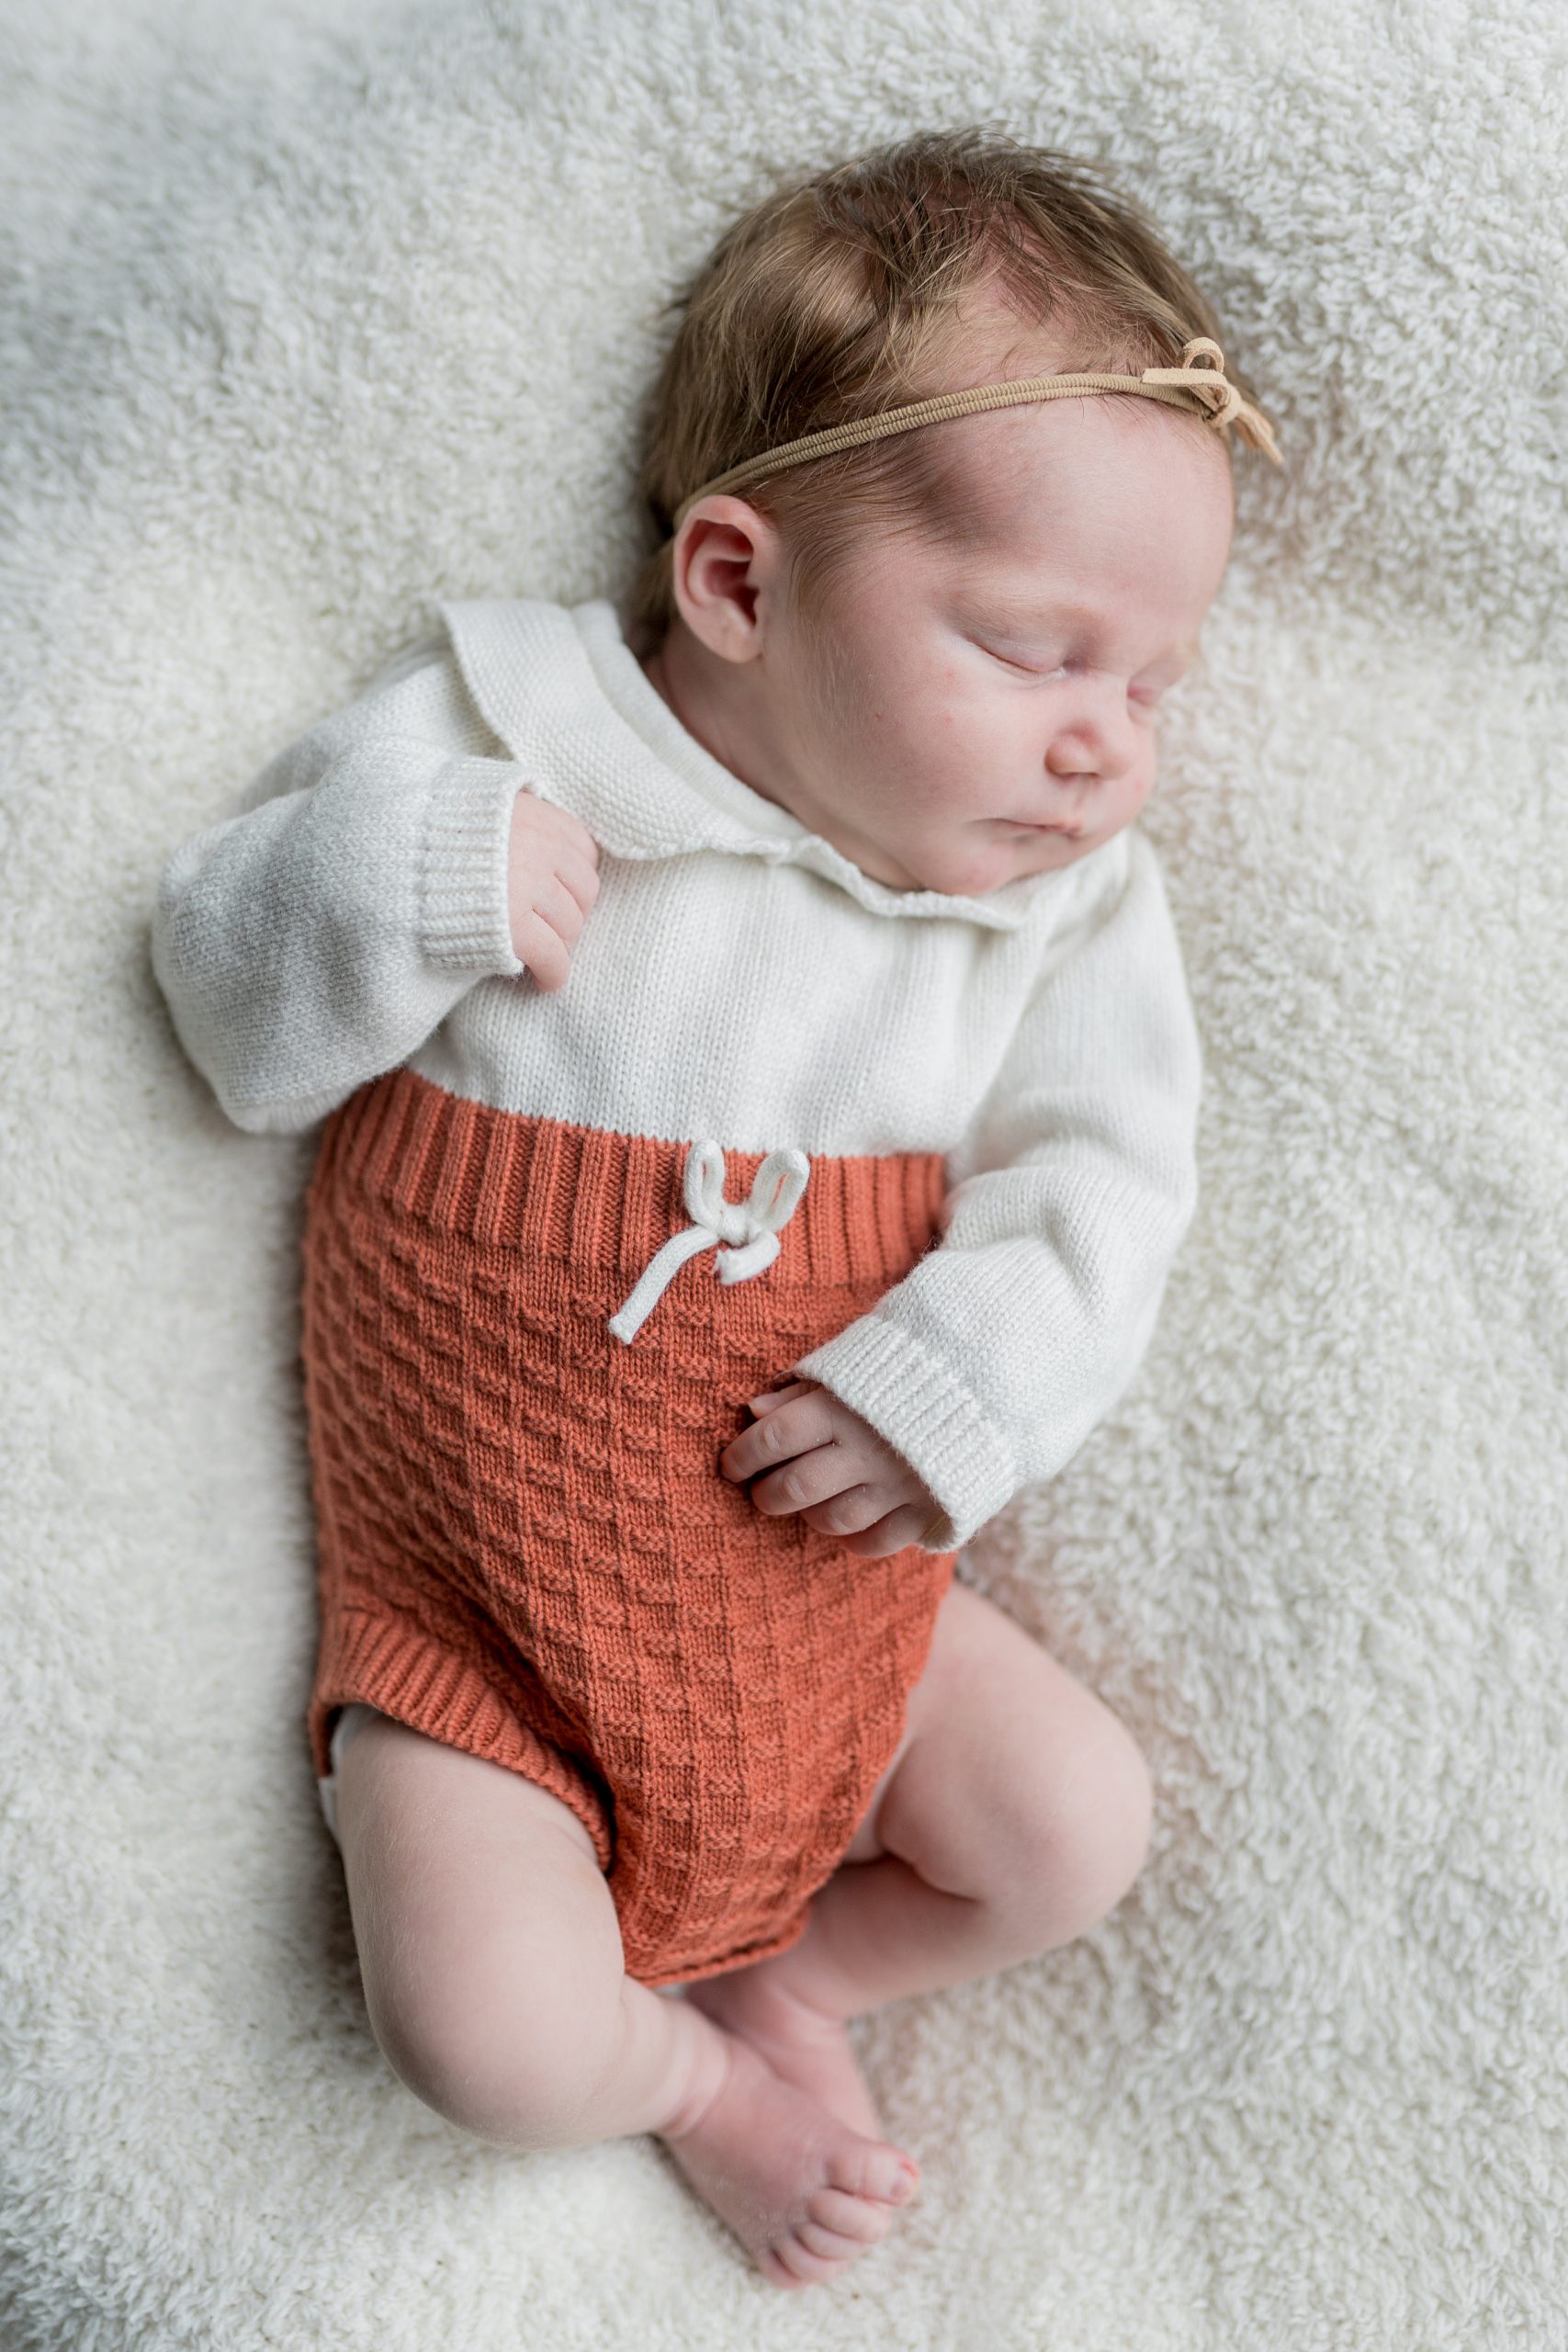 baby girl in knit outfit sleeps during Nashville lifestyle newborn portrait session